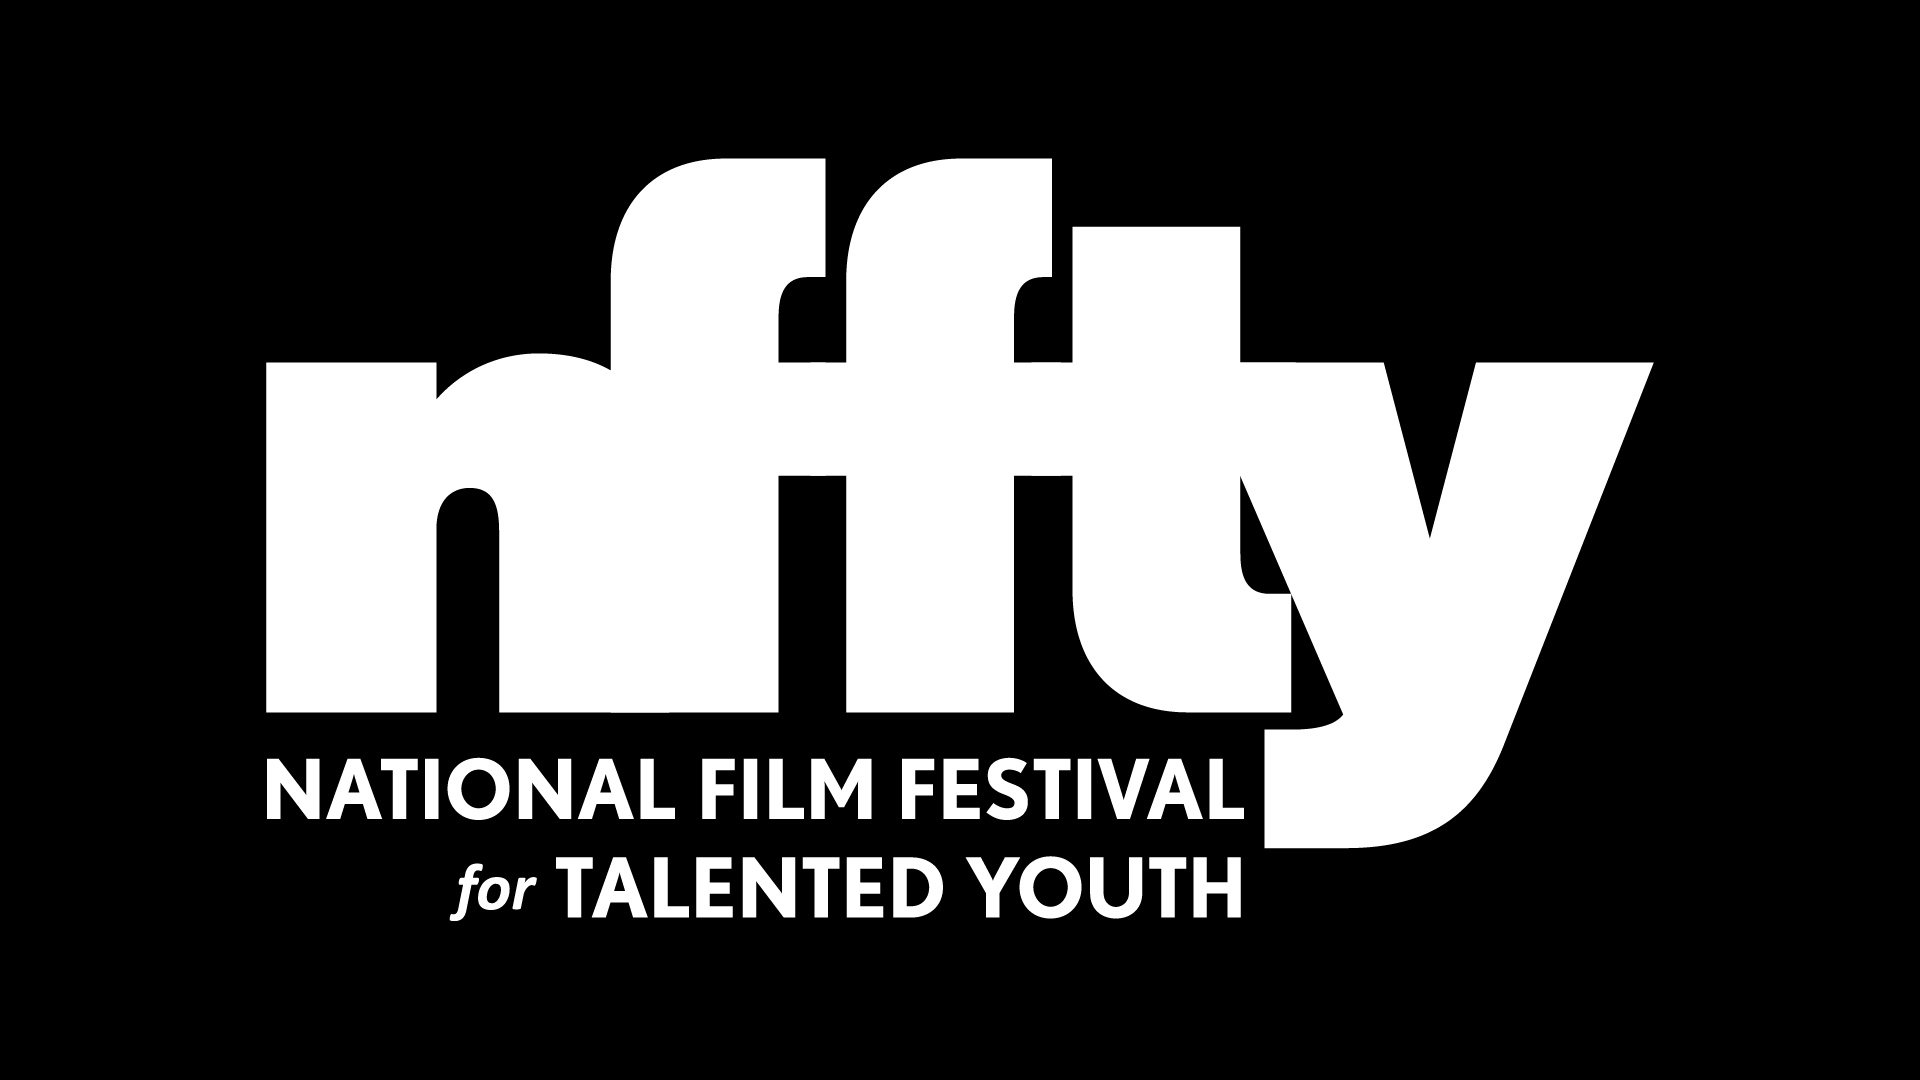 Short Films from NFFTY